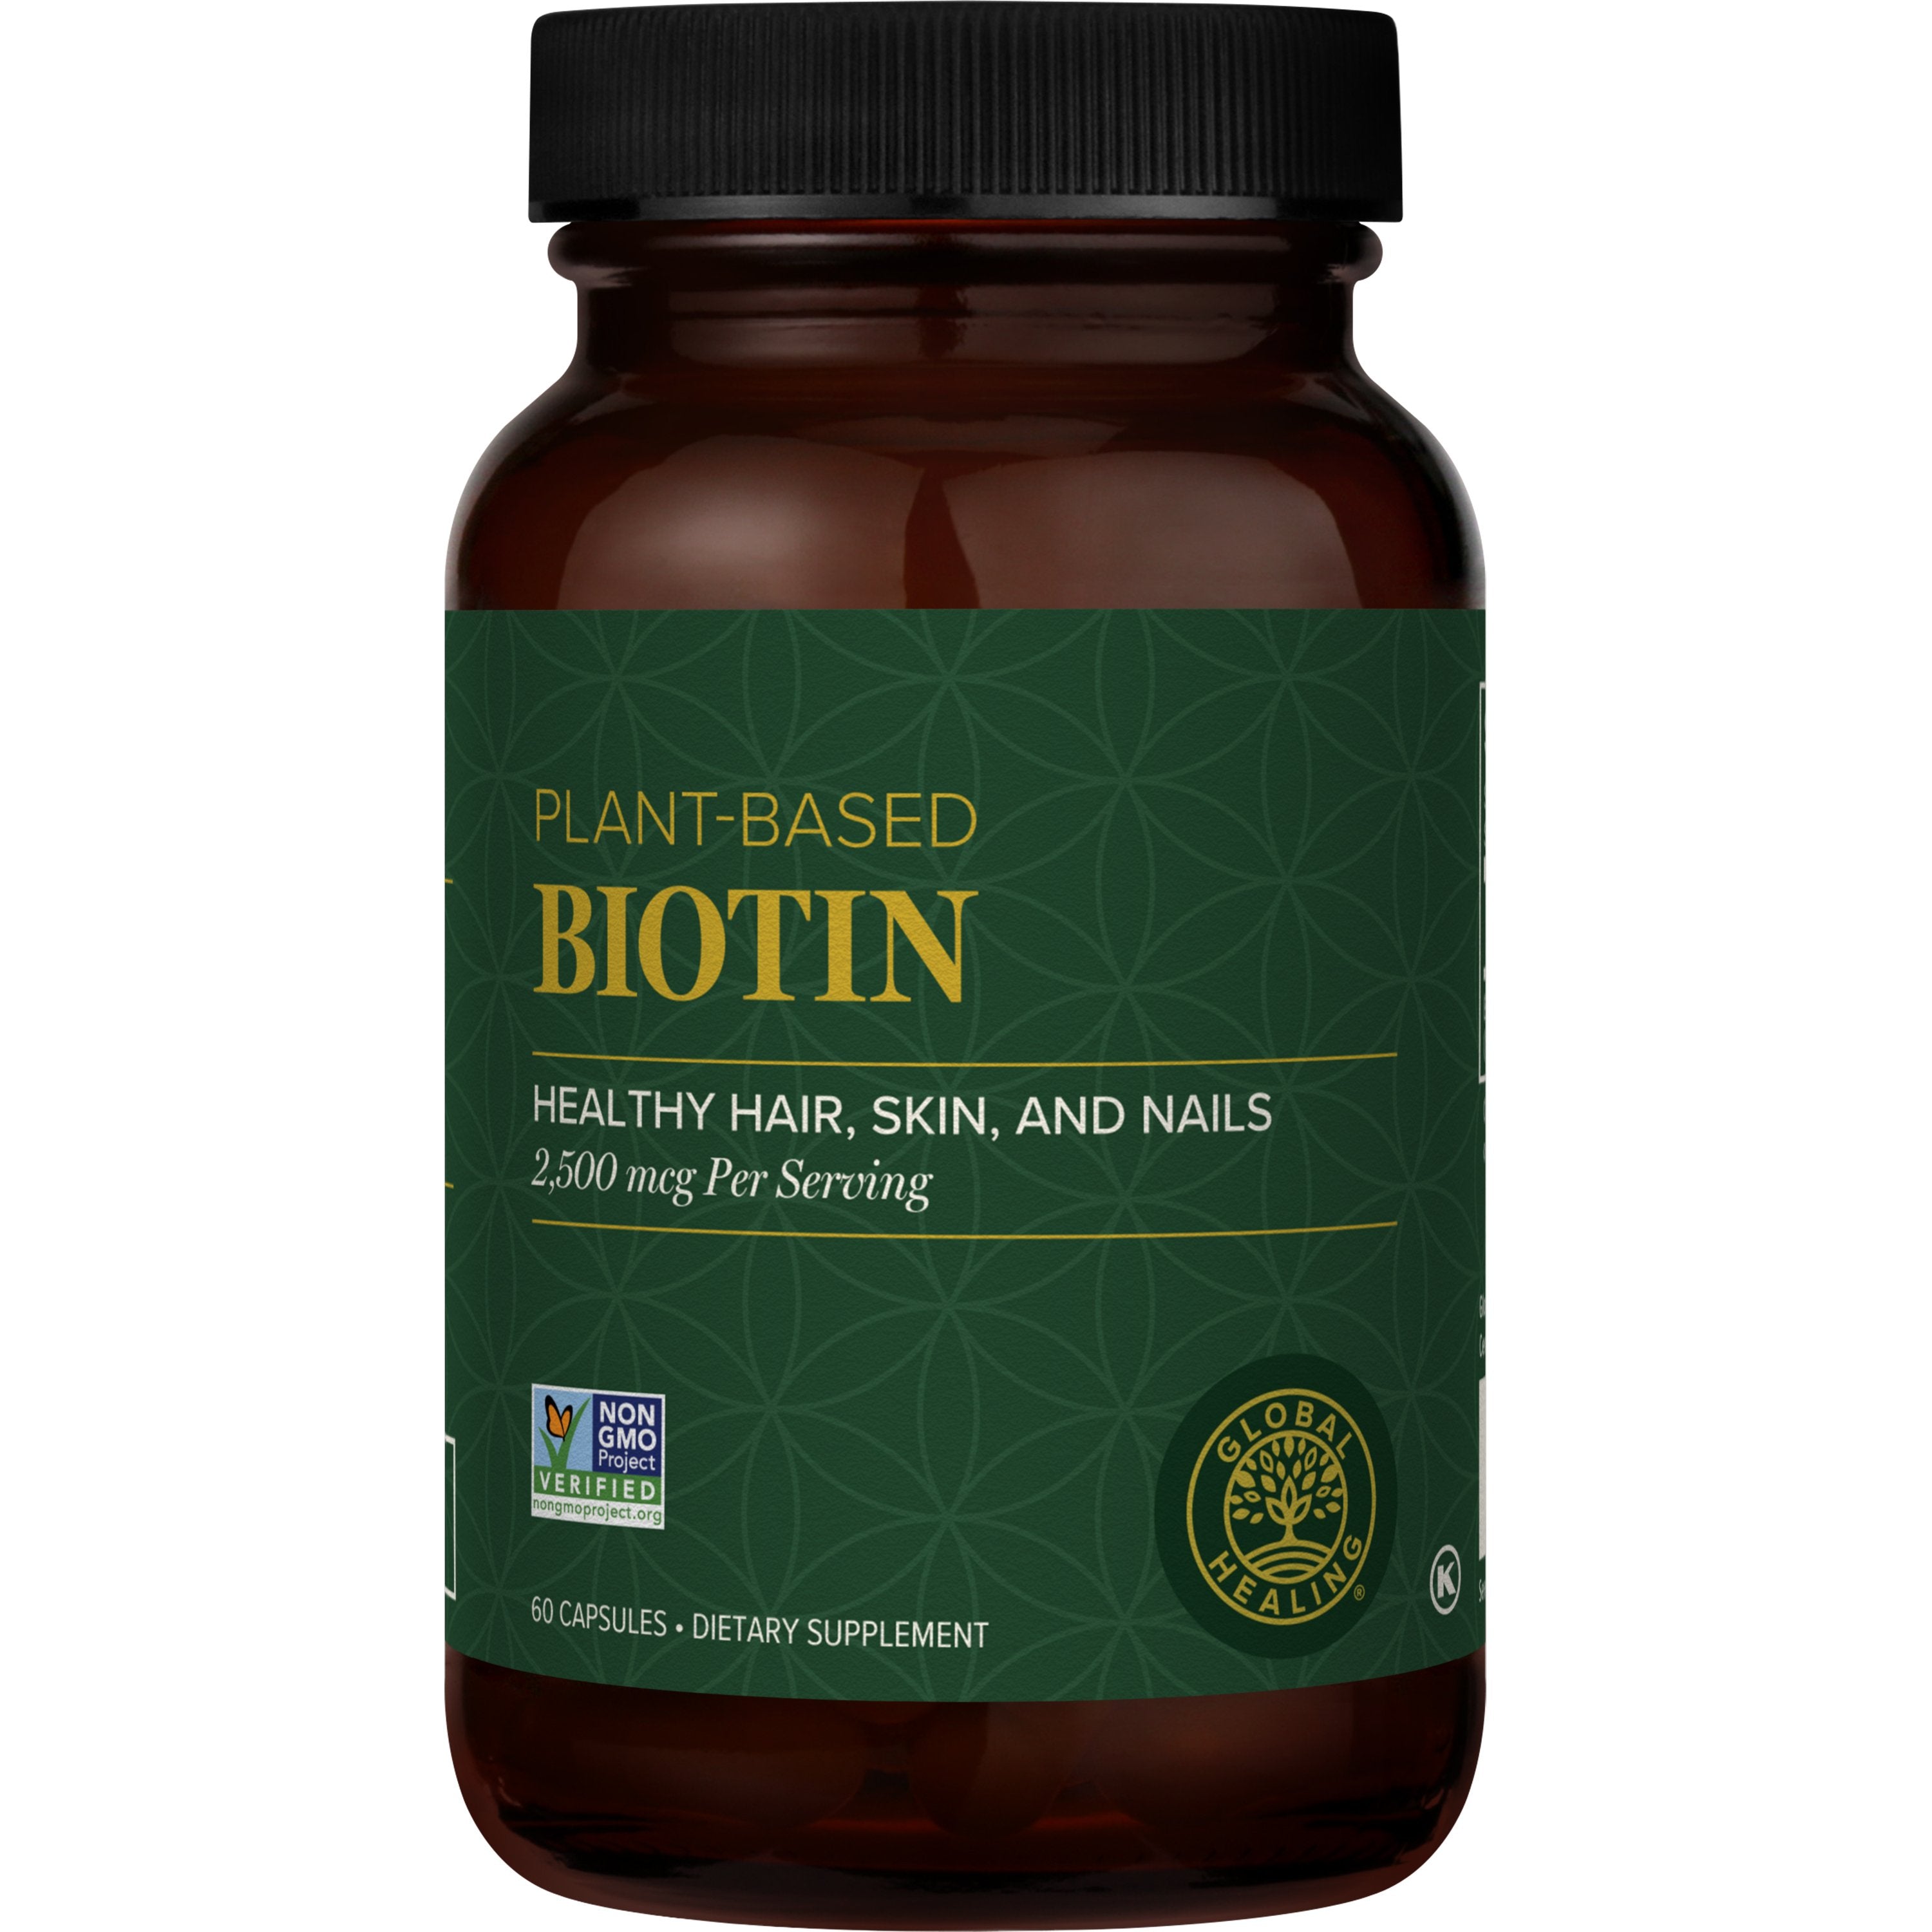 Global Healing Plant Based Biotin For Healthy Hair and Nails 60 Capsules Bottle